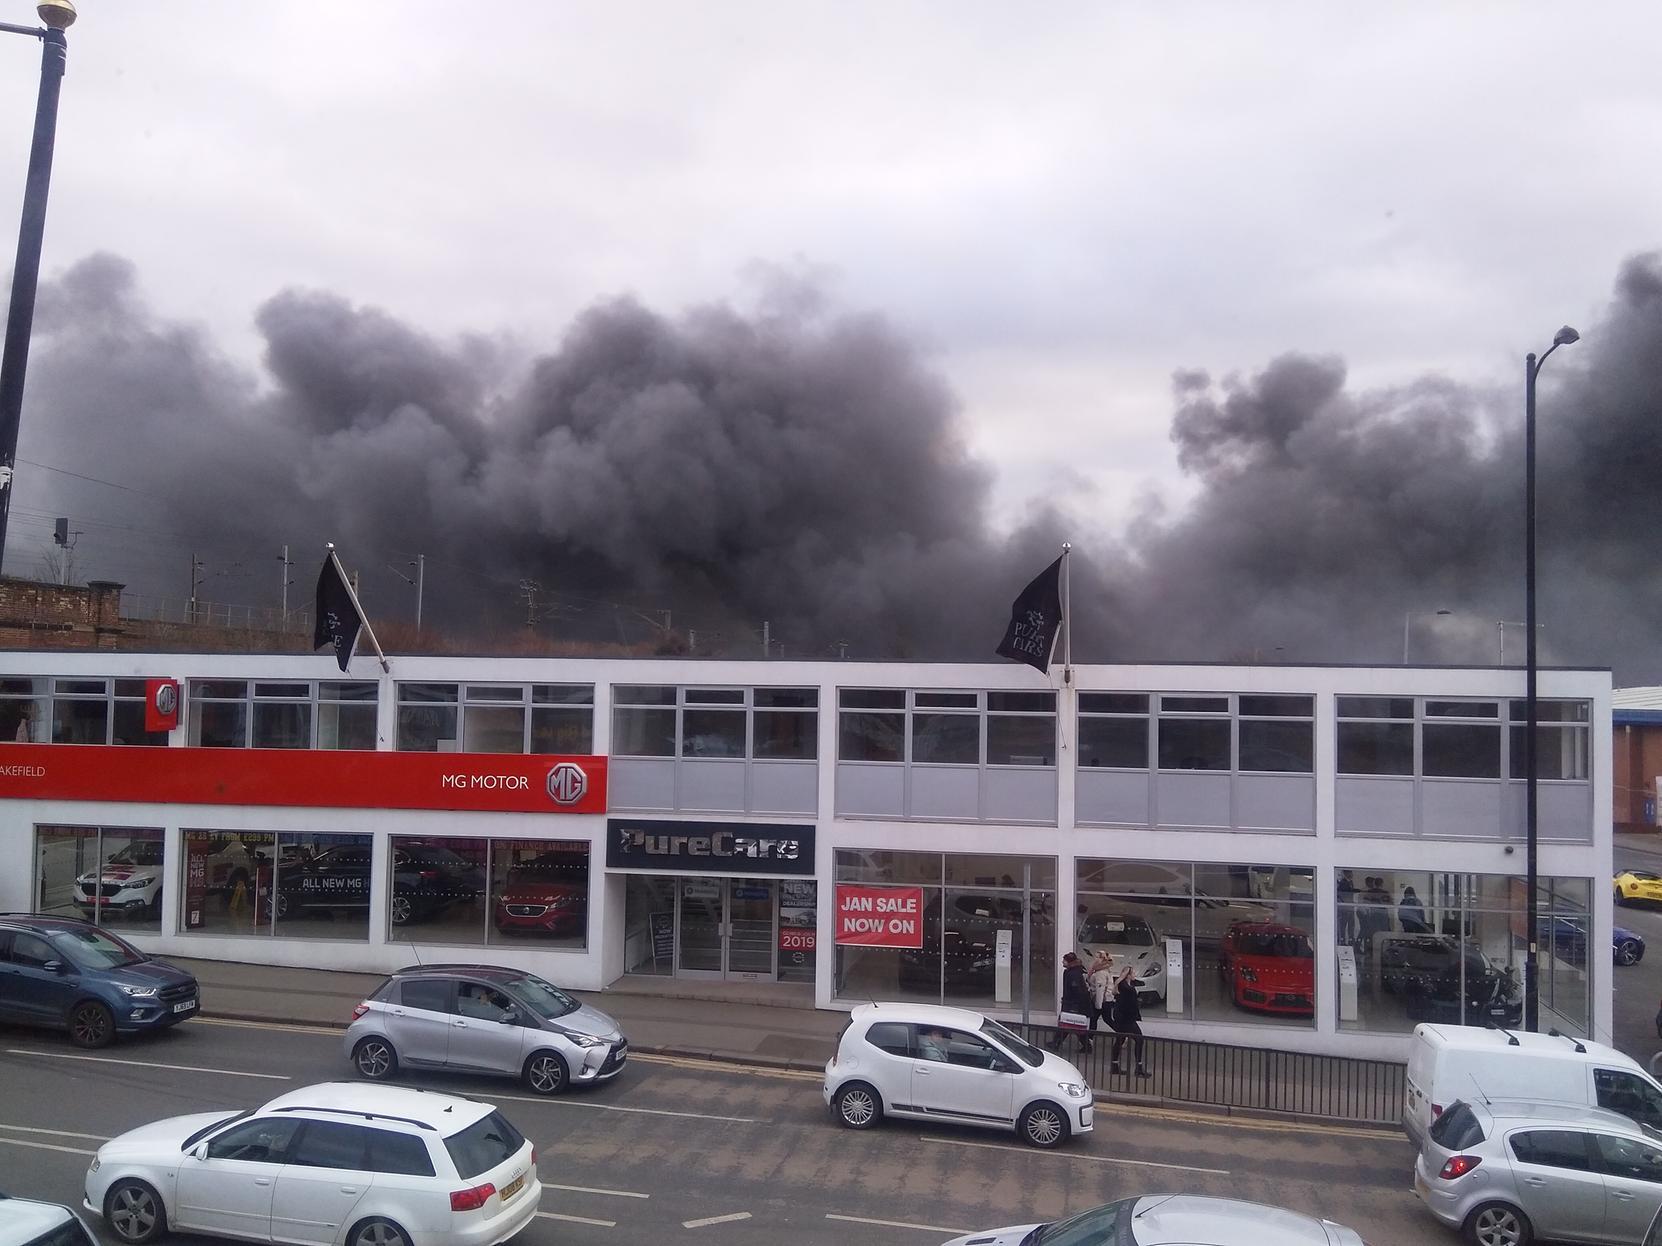 These photos, taken on Westgate, show the rising cloud of smoke over Westgate Retail Park on Saturday afternoon.